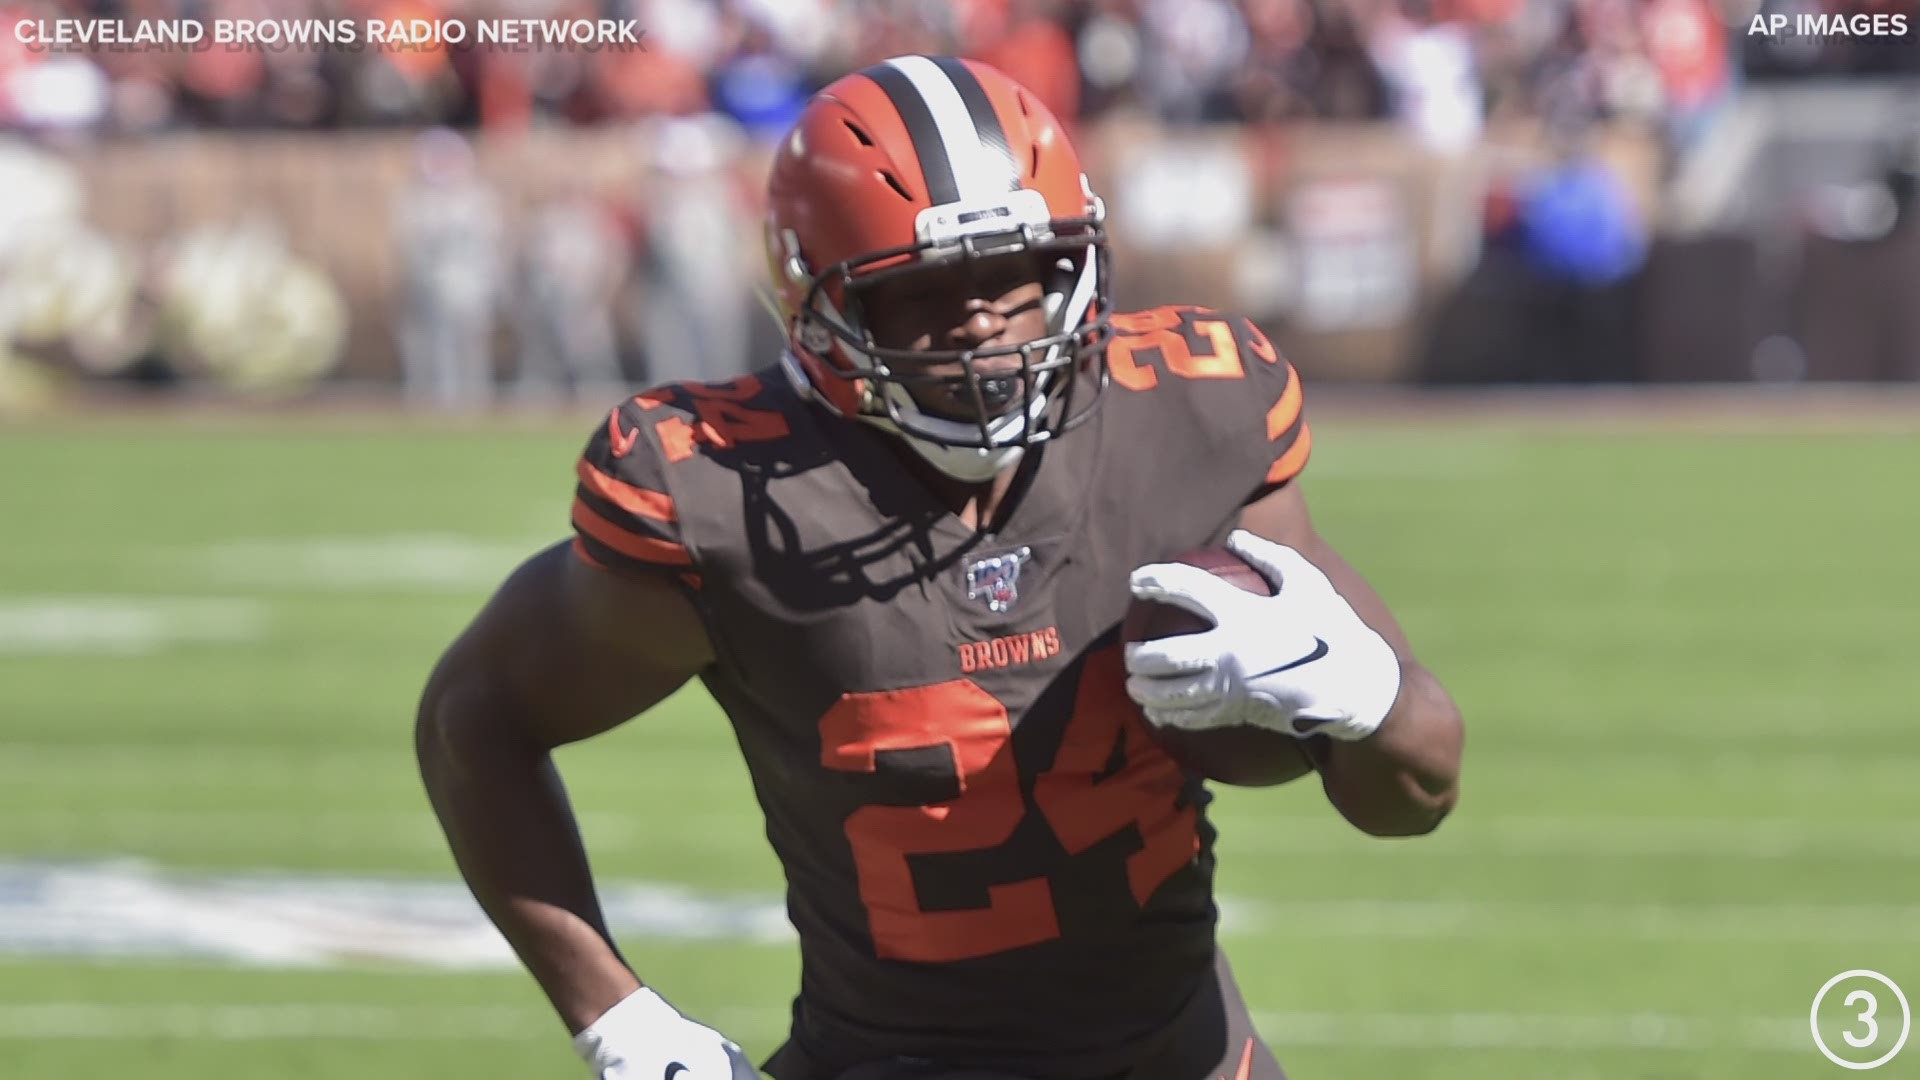 A seven-yard touchdown run from second-year back Nick Chubb gave the Cleveland Browns a 7-0 lead over the Seattle Seahawks early in the first quarter.